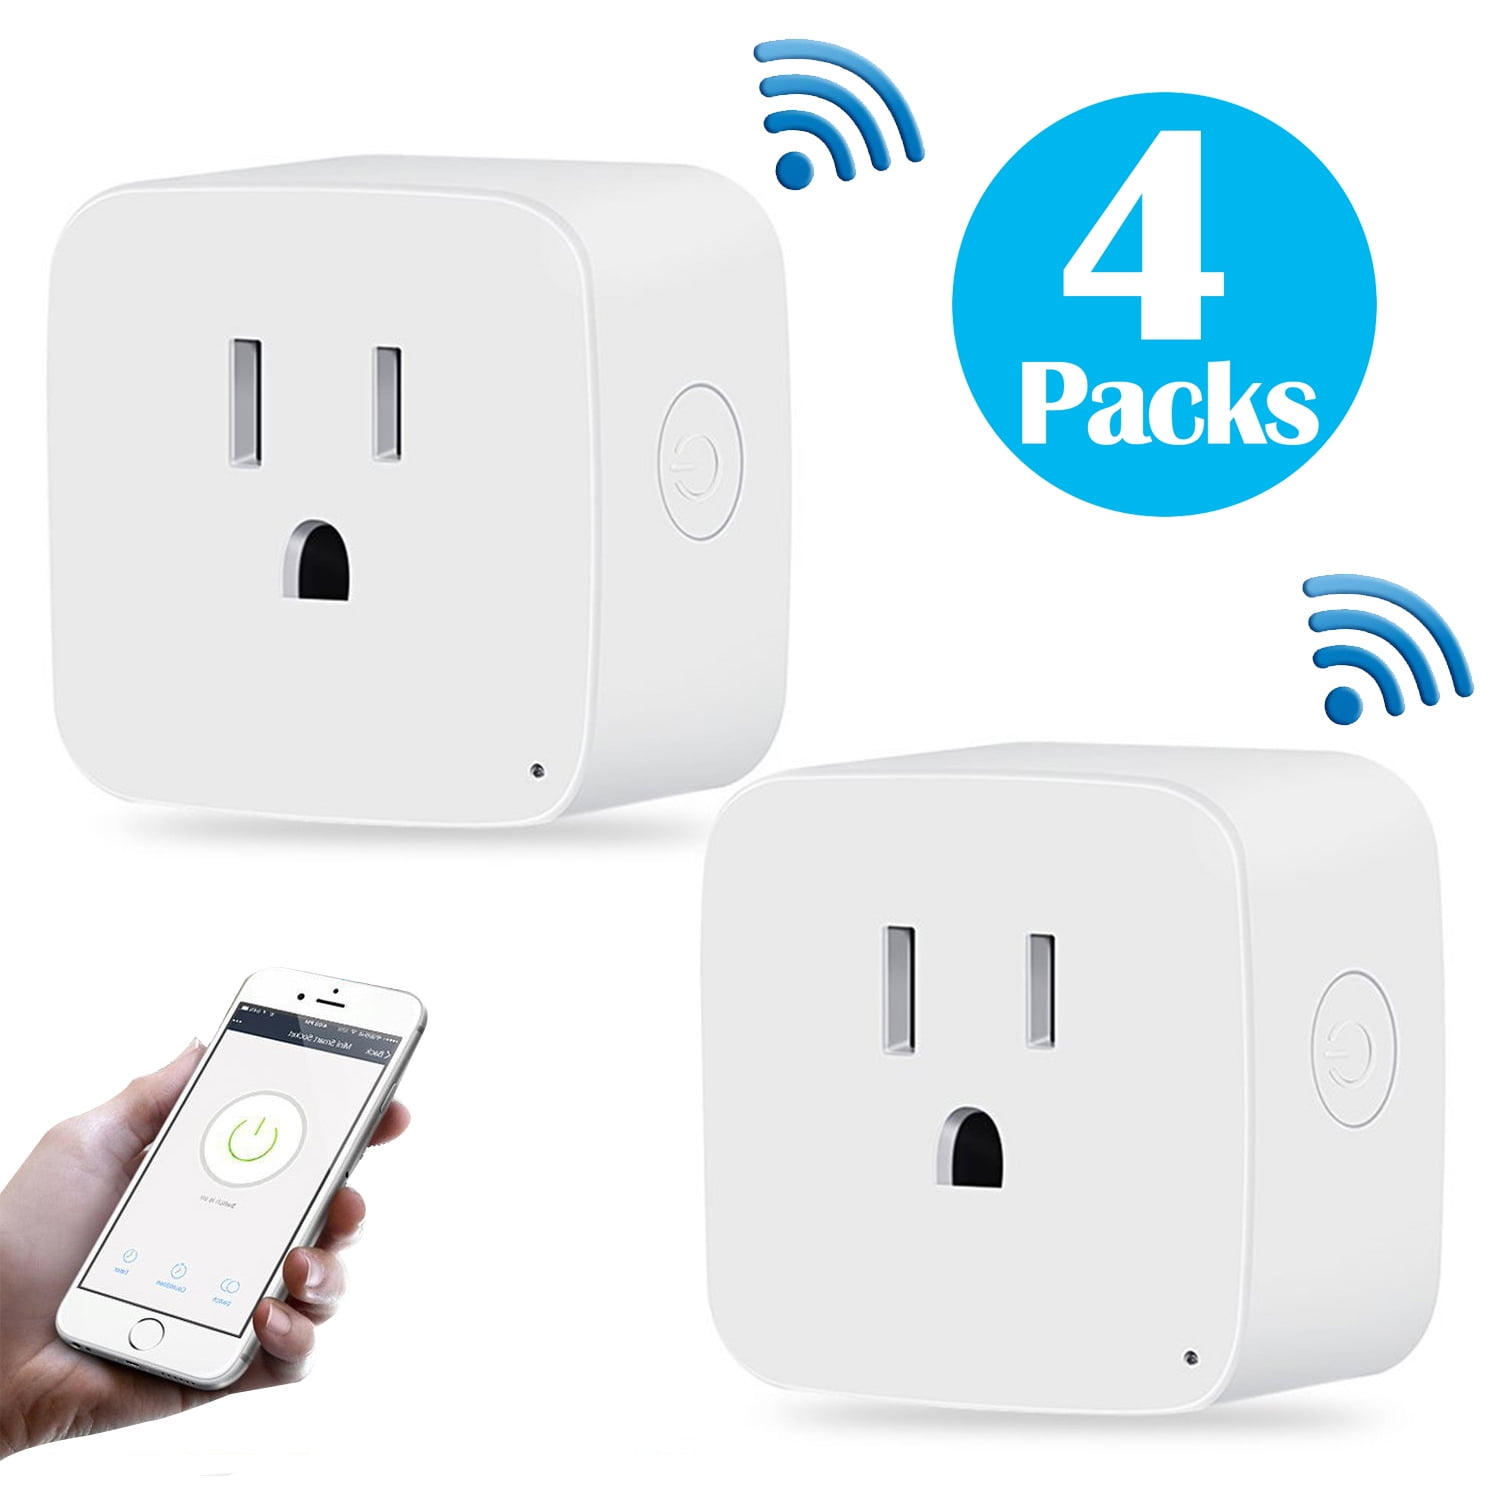 Google Home and IFTTT Smart Plug WiFi Outlet 13A Smart Socket Compatible with Alexa Timing Function Remote Control Energy Monitoring Wireless WiFi Socket Alexa Plugs No Hub Required 4 Pack